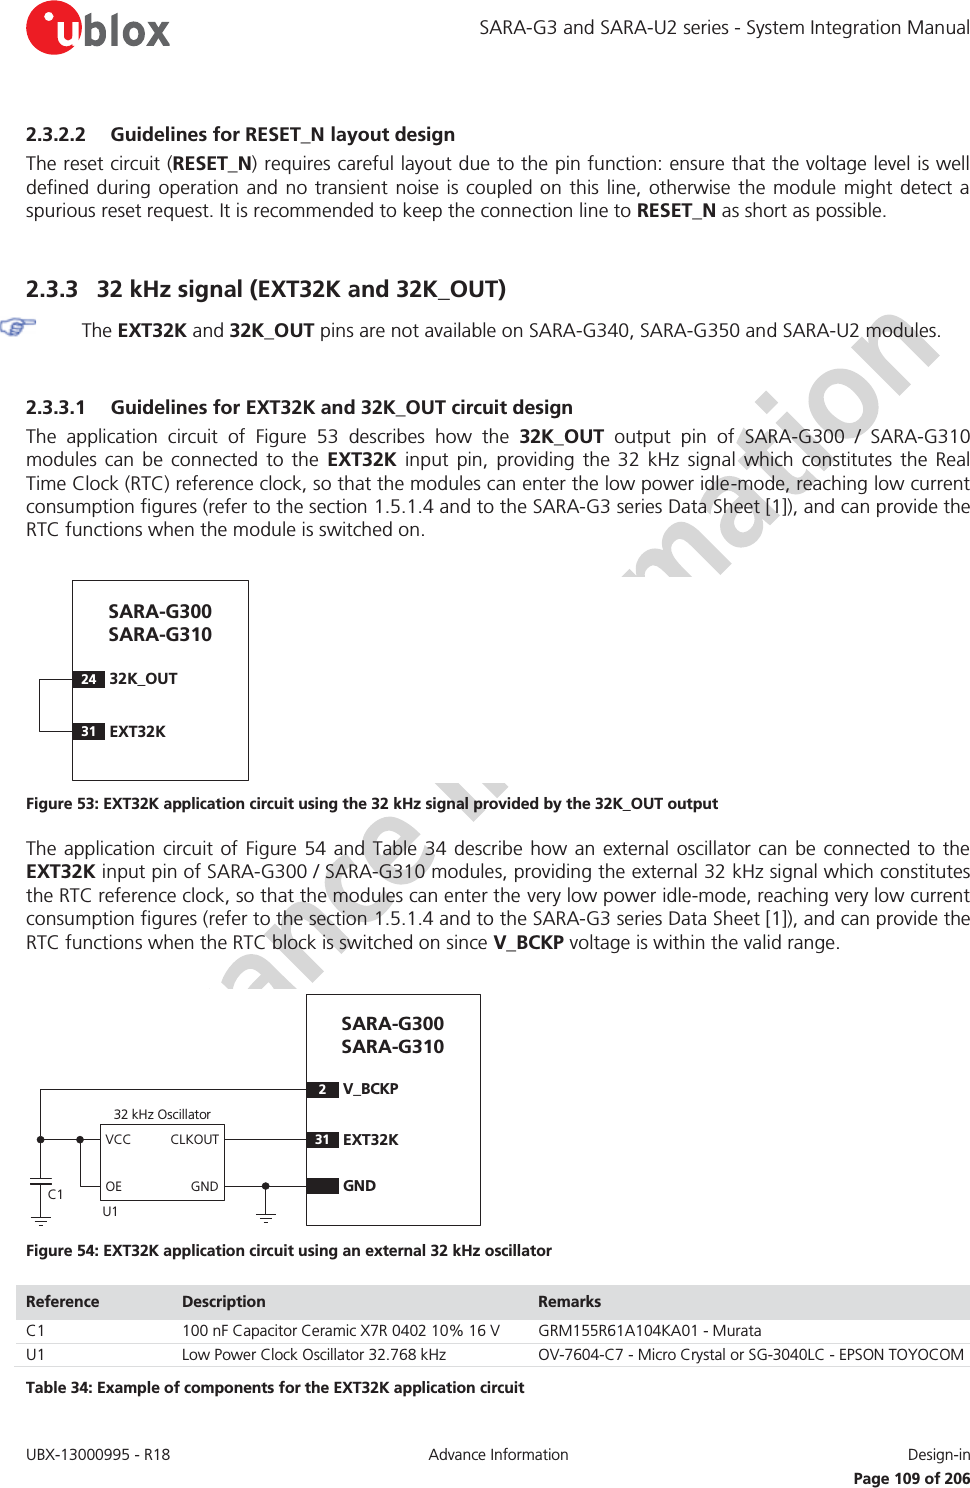 SARA-G3 and SARA-U2 series - System Integration Manual UBX-13000995 - R18  Advance Information  Design-in   Page 109 of 206 2.3.2.2 Guidelines for RESET_N layout design The reset circuit (RESET_N) requires careful layout due to the pin function: ensure that the voltage level is well defined during operation and no transient noise is coupled on this line, otherwise the module might detect a spurious reset request. It is recommended to keep the connection line to RESET_N as short as possible.  2.3.3 32 kHz signal (EXT32K and 32K_OUT)  The EXT32K and 32K_OUT pins are not available on SARA-G340, SARA-G350 and SARA-U2 modules.  2.3.3.1 Guidelines for EXT32K and 32K_OUT circuit design The application circuit of Figure 53 describes how the 32K_OUT output pin of SARA-G300 / SARA-G310 modules can be connected to the EXT32K input pin, providing the 32 kHz signal which constitutes the Real Time Clock (RTC) reference clock, so that the modules can enter the low power idle-mode, reaching low current consumption figures (refer to the section 1.5.1.4 and to the SARA-G3 series Data Sheet [1]), and can provide the RTC functions when the module is switched on.  2432K_OUTSARA-G300 SARA-G31031 EXT32K Figure 53: EXT32K application circuit using the 32 kHz signal provided by the 32K_OUT output The application circuit of Figure 54 and Table 34 describe how an external oscillator can be connected to the EXT32K input pin of SARA-G300 / SARA-G310 modules, providing the external 32 kHz signal which constitutes the RTC reference clock, so that the modules can enter the very low power idle-mode, reaching very low current consumption figures (refer to the section 1.5.1.4 and to the SARA-G3 series Data Sheet [1]), and can provide the RTC functions when the RTC block is switched on since V_BCKP voltage is within the valid range.  2V_BCKPGNDSARA-G300 SARA-G31031 EXT32K32 kHz OscillatorGNDCLKOUTOEVCCC1U1 Figure 54: EXT32K application circuit using an external 32 kHz oscillator Reference  Description  Remarks C1 100 nF Capacitor Ceramic X7R 0402 10% 16 V GRM155R61A104KA01 - Murata U1 Low Power Clock Oscillator 32.768 kHz OV-7604-C7 - Micro Crystal or SG-3040LC - EPSON TOYOCOM Table 34: Example of components for the EXT32K application circuit 